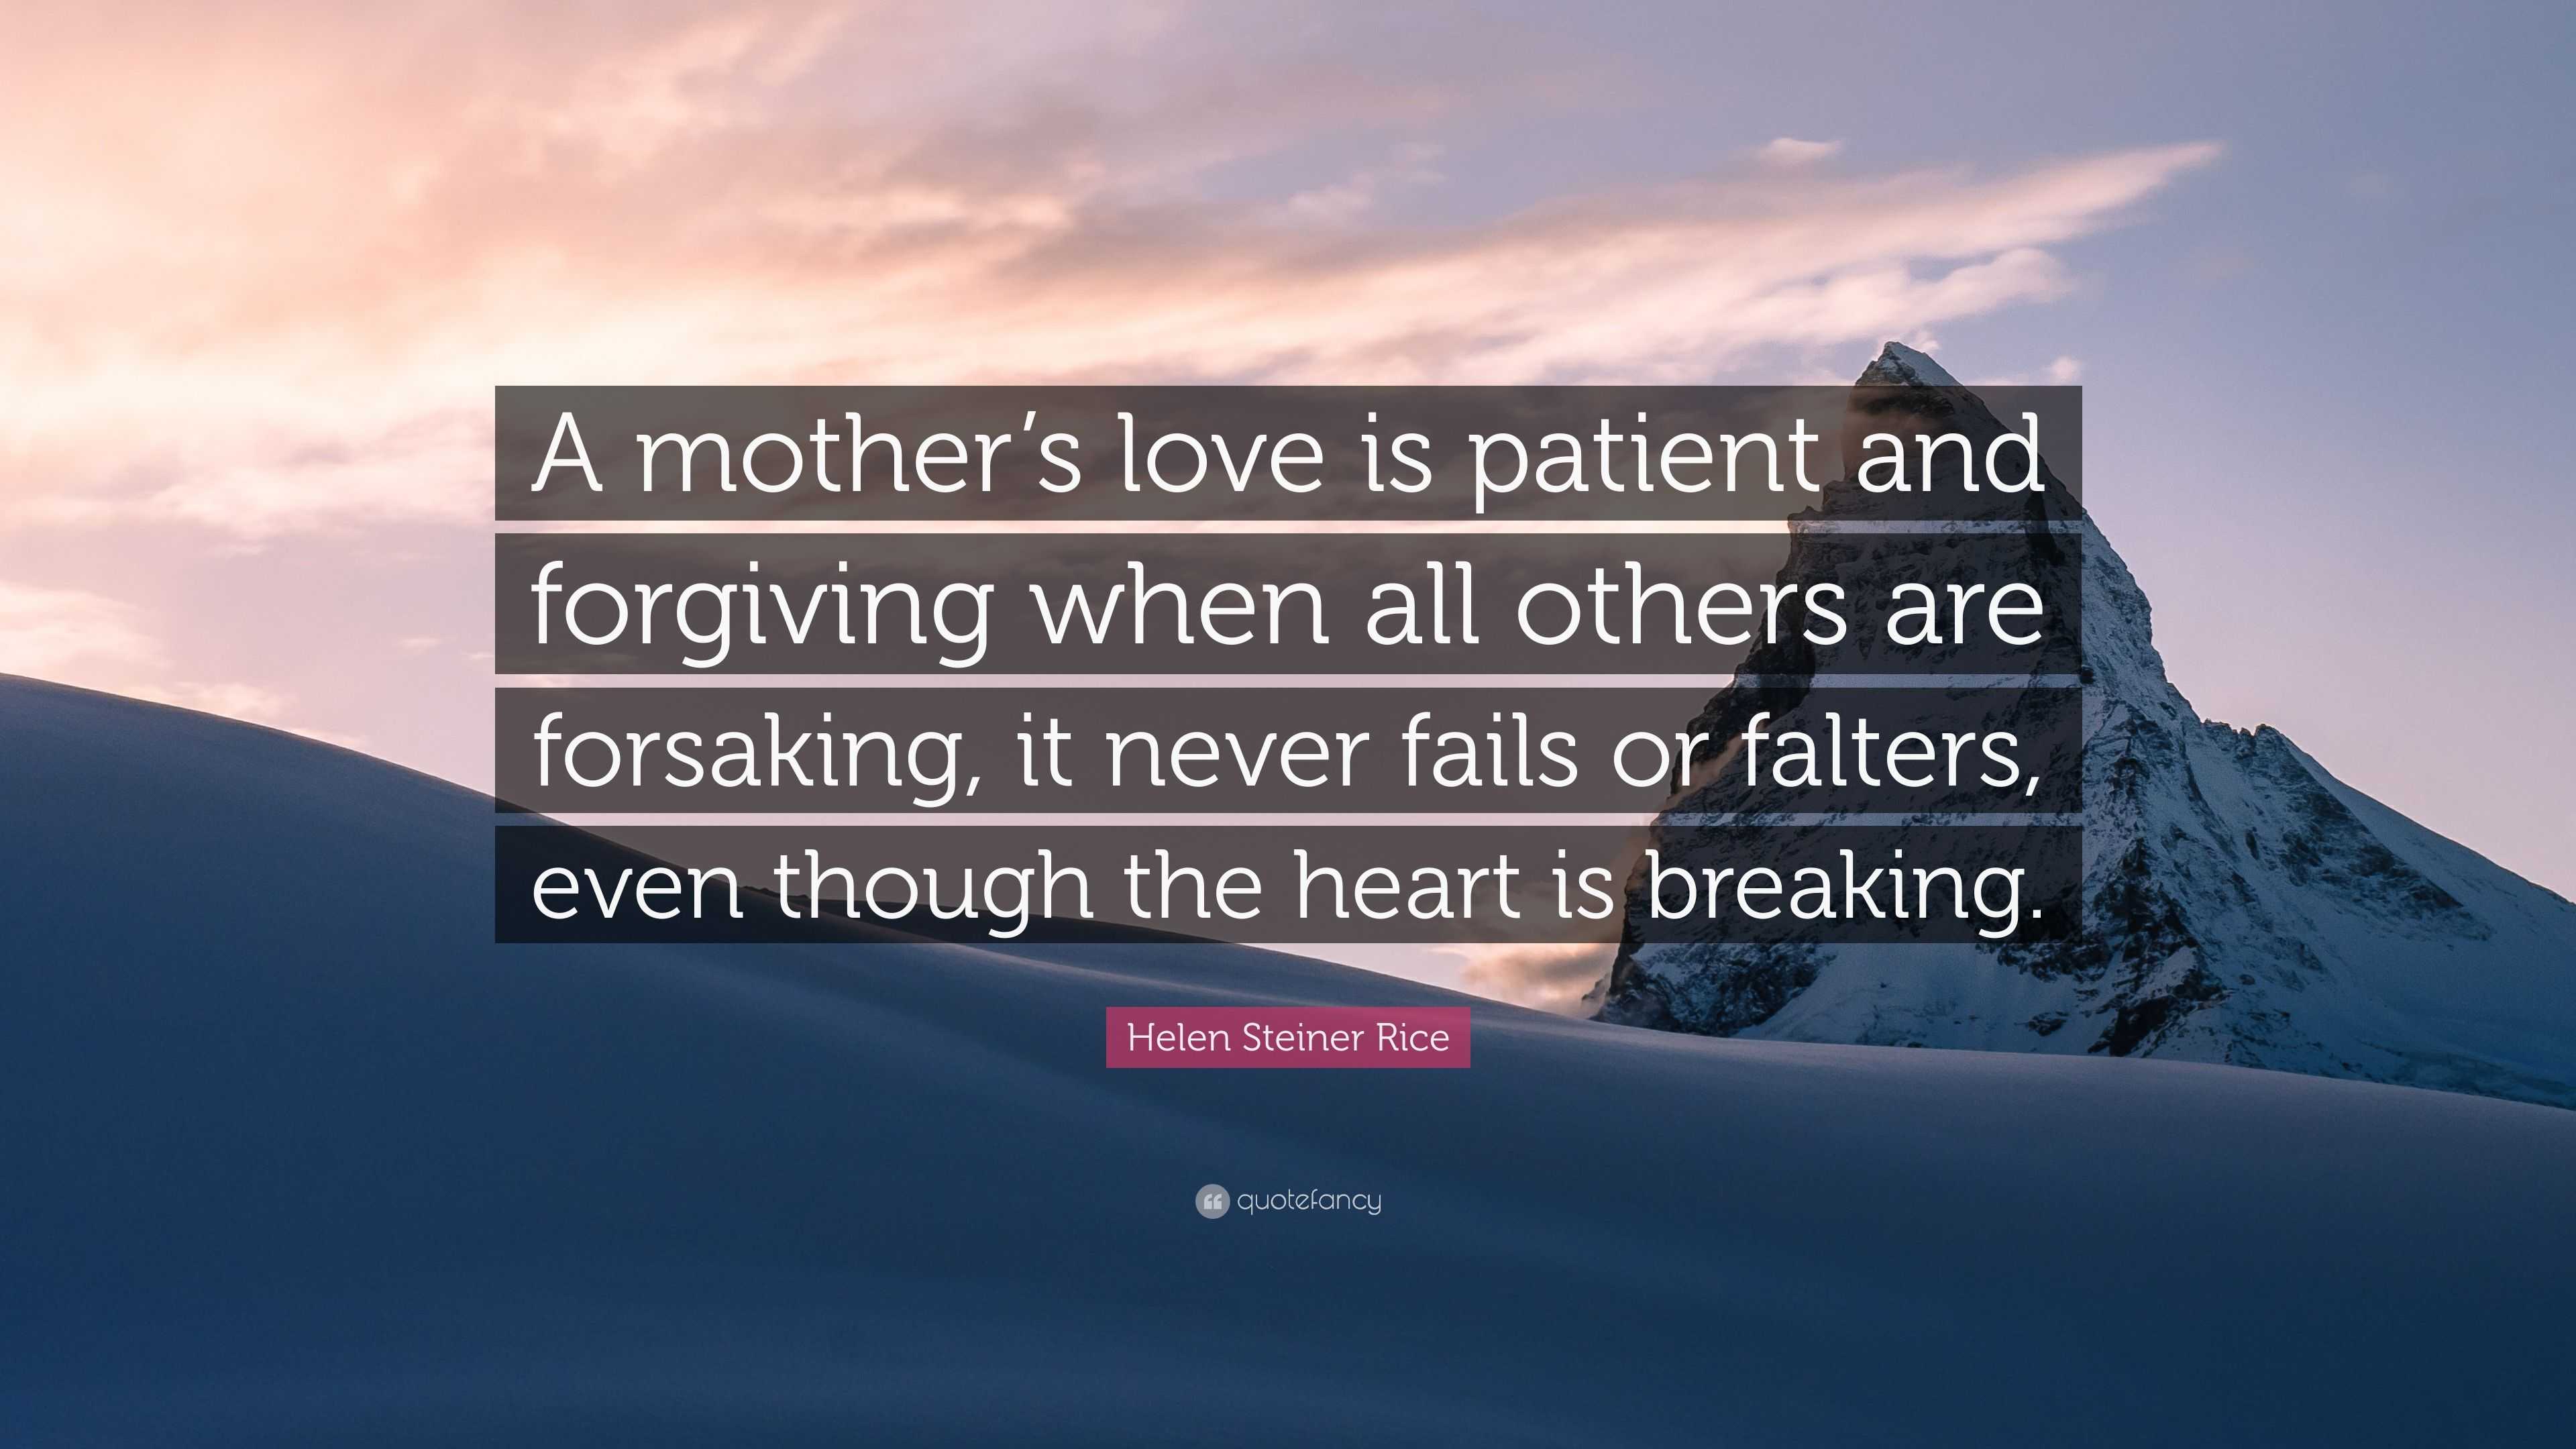 Helen Steiner Rice Quote “A mother’s love is patient and